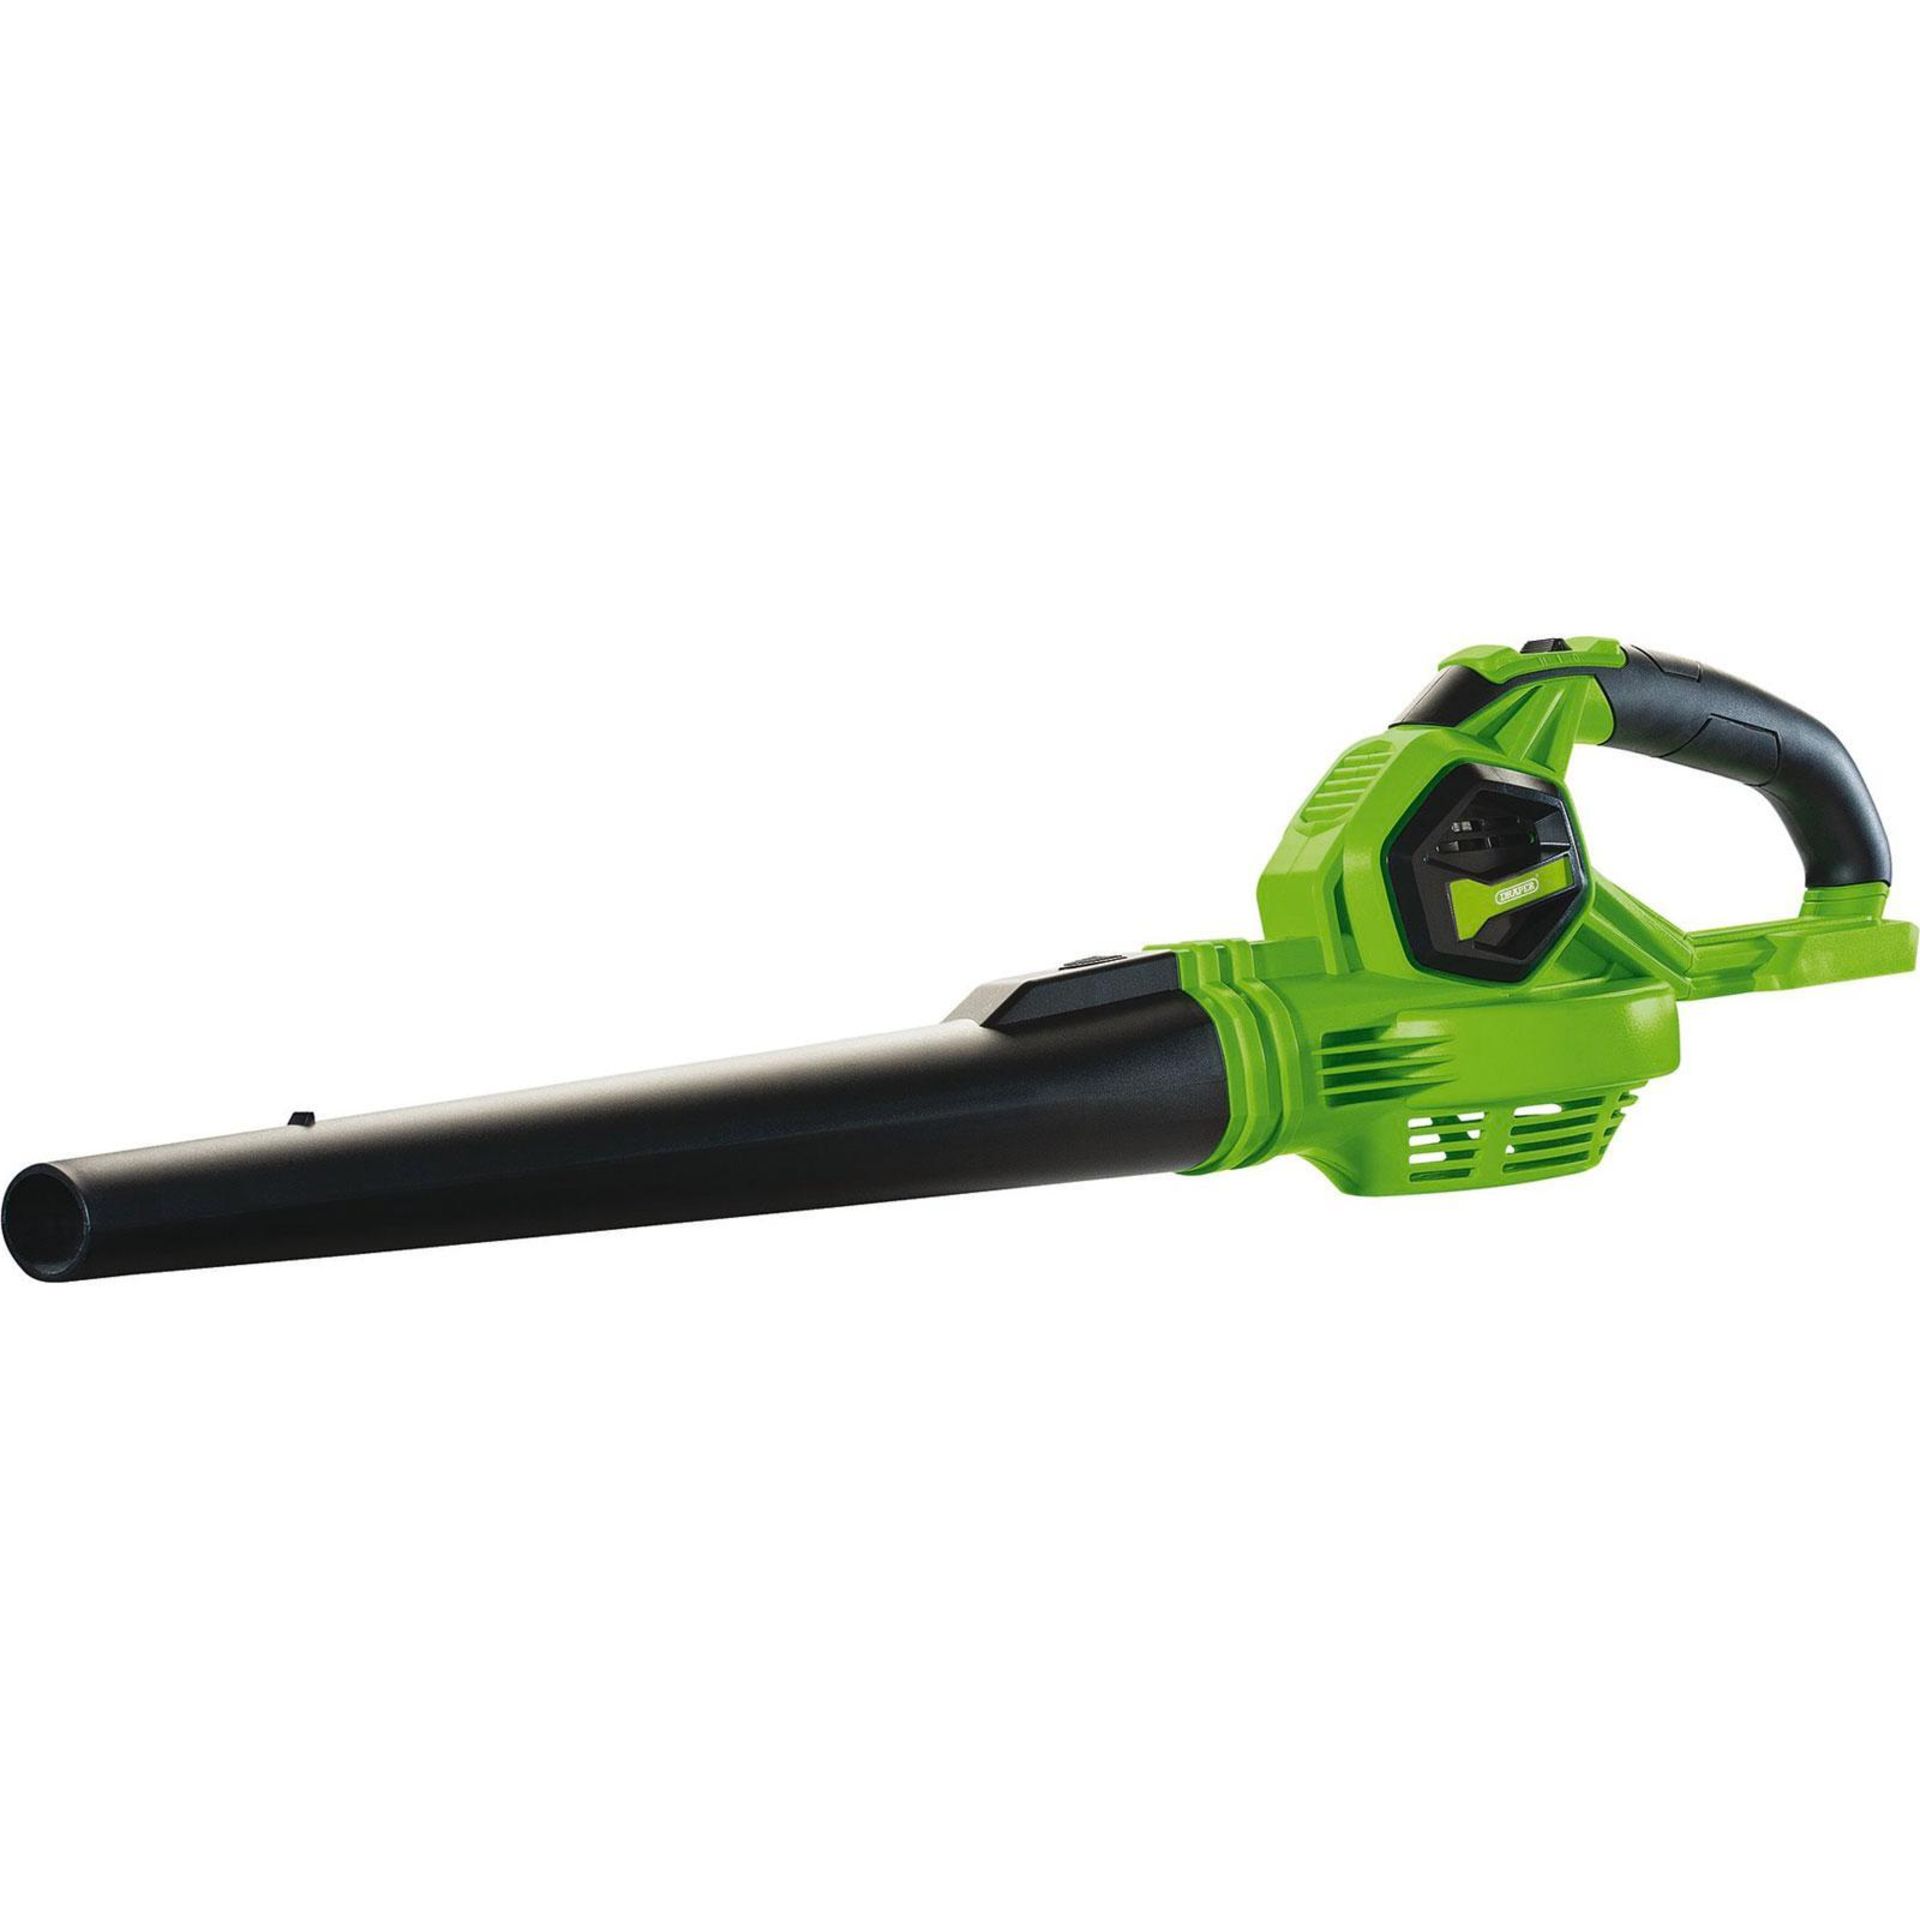 Draper D20GLB 20v Cordless Leaf Blower - ER47. Features: 2 speed 110 and 210km/h, Extends to